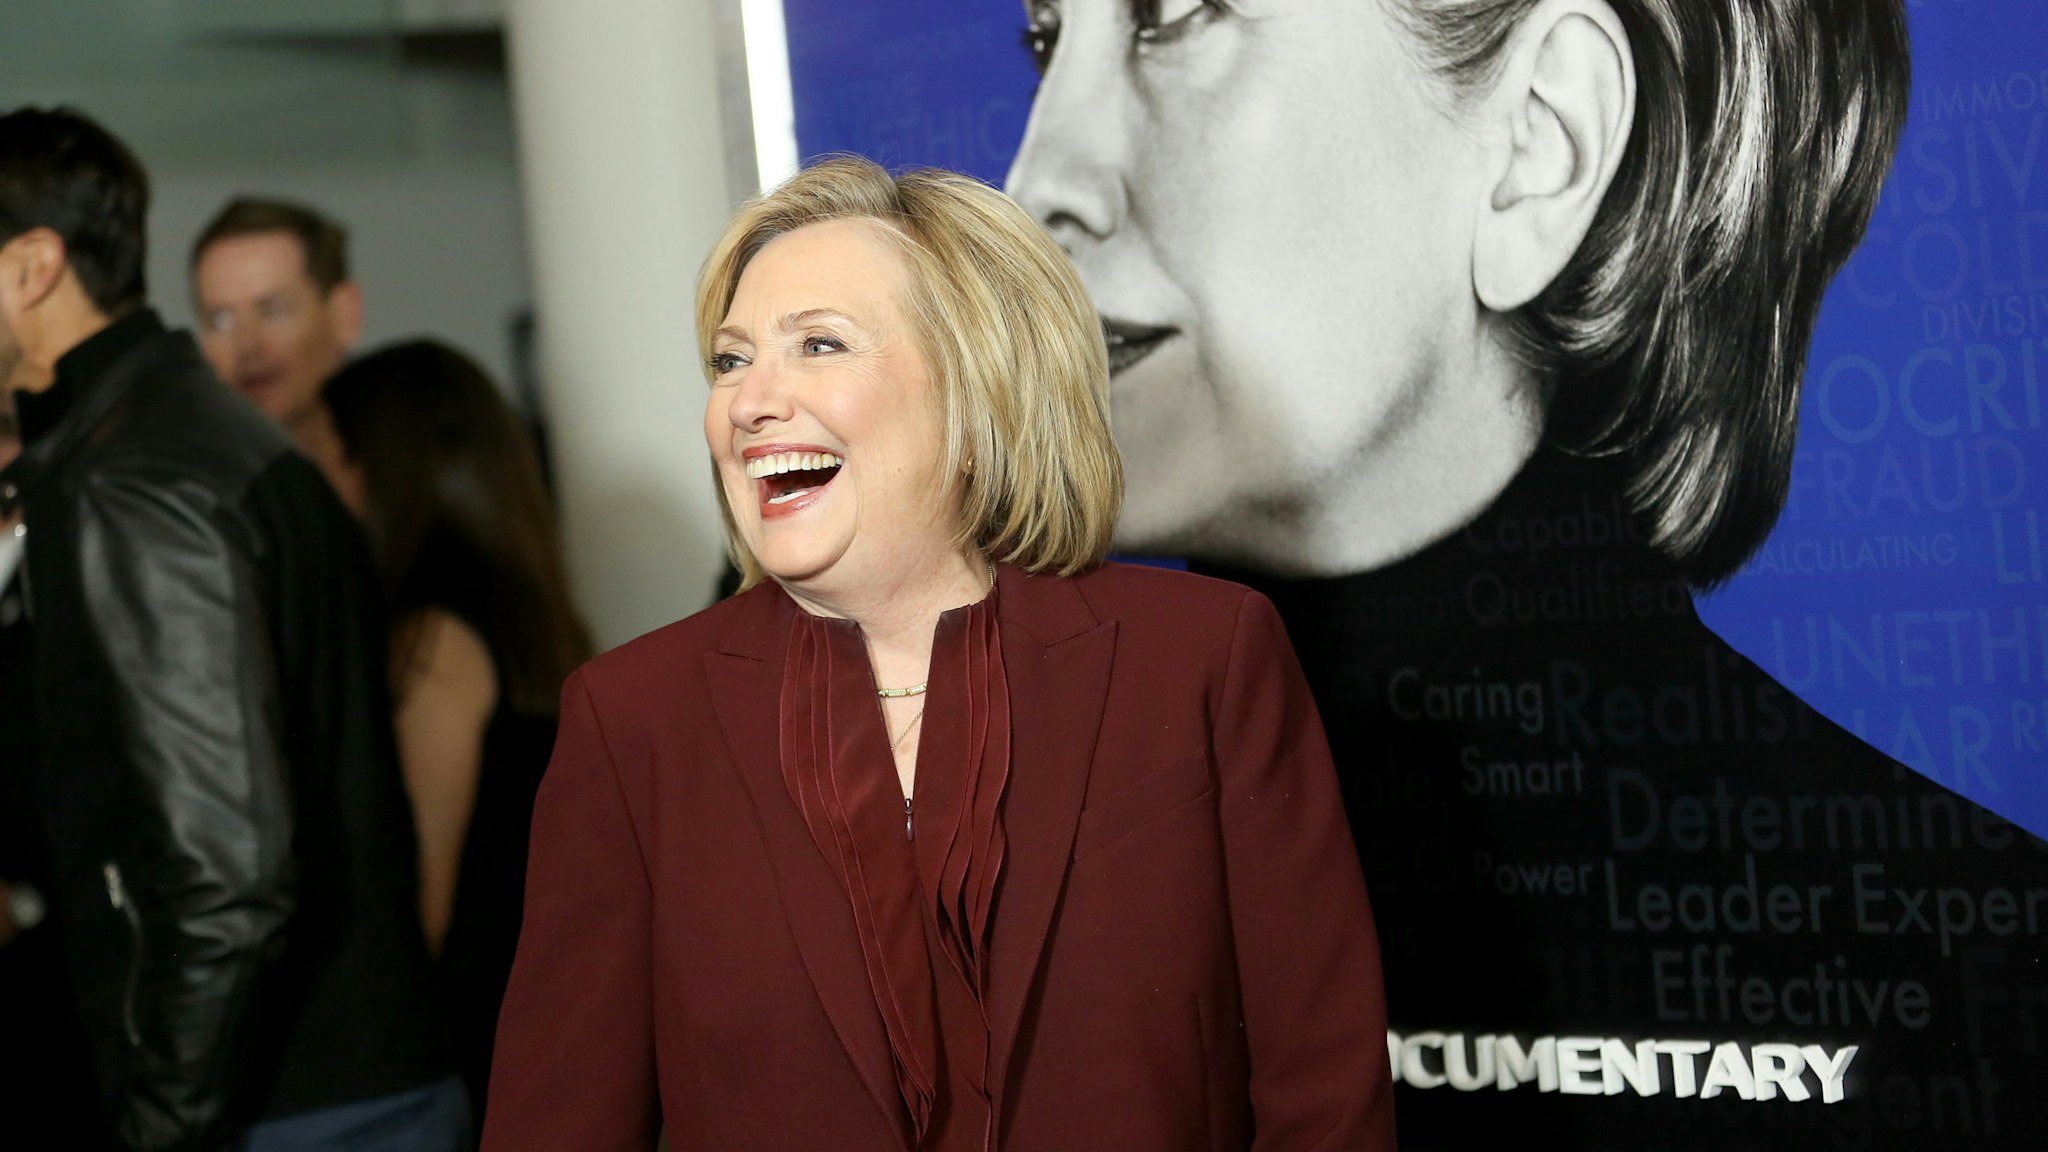 NEW YORK, NEW YORK - MARCH 04: Hillary Rodham Clinton attends Hulu's "Hillary" NYC Premiere on March 04, 2020 in New York City. (Photo by Monica Schipper/Getty Images for Hulu)